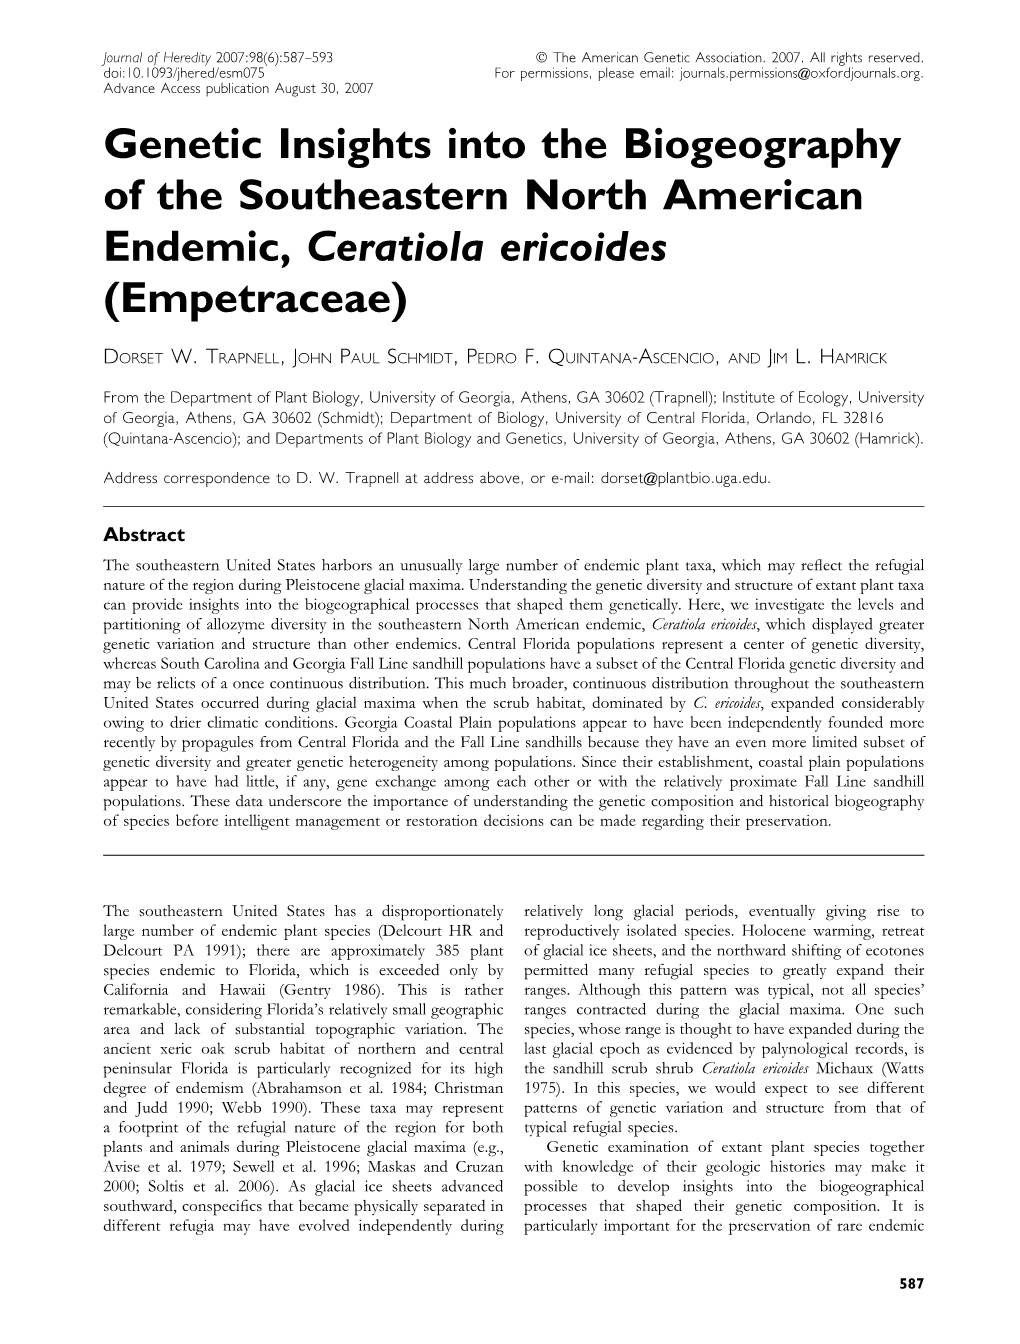 Genetic Insights Into the Biogeography of the Southeastern North American Endemic, Ceratiola Ericoides (Empetraceae)